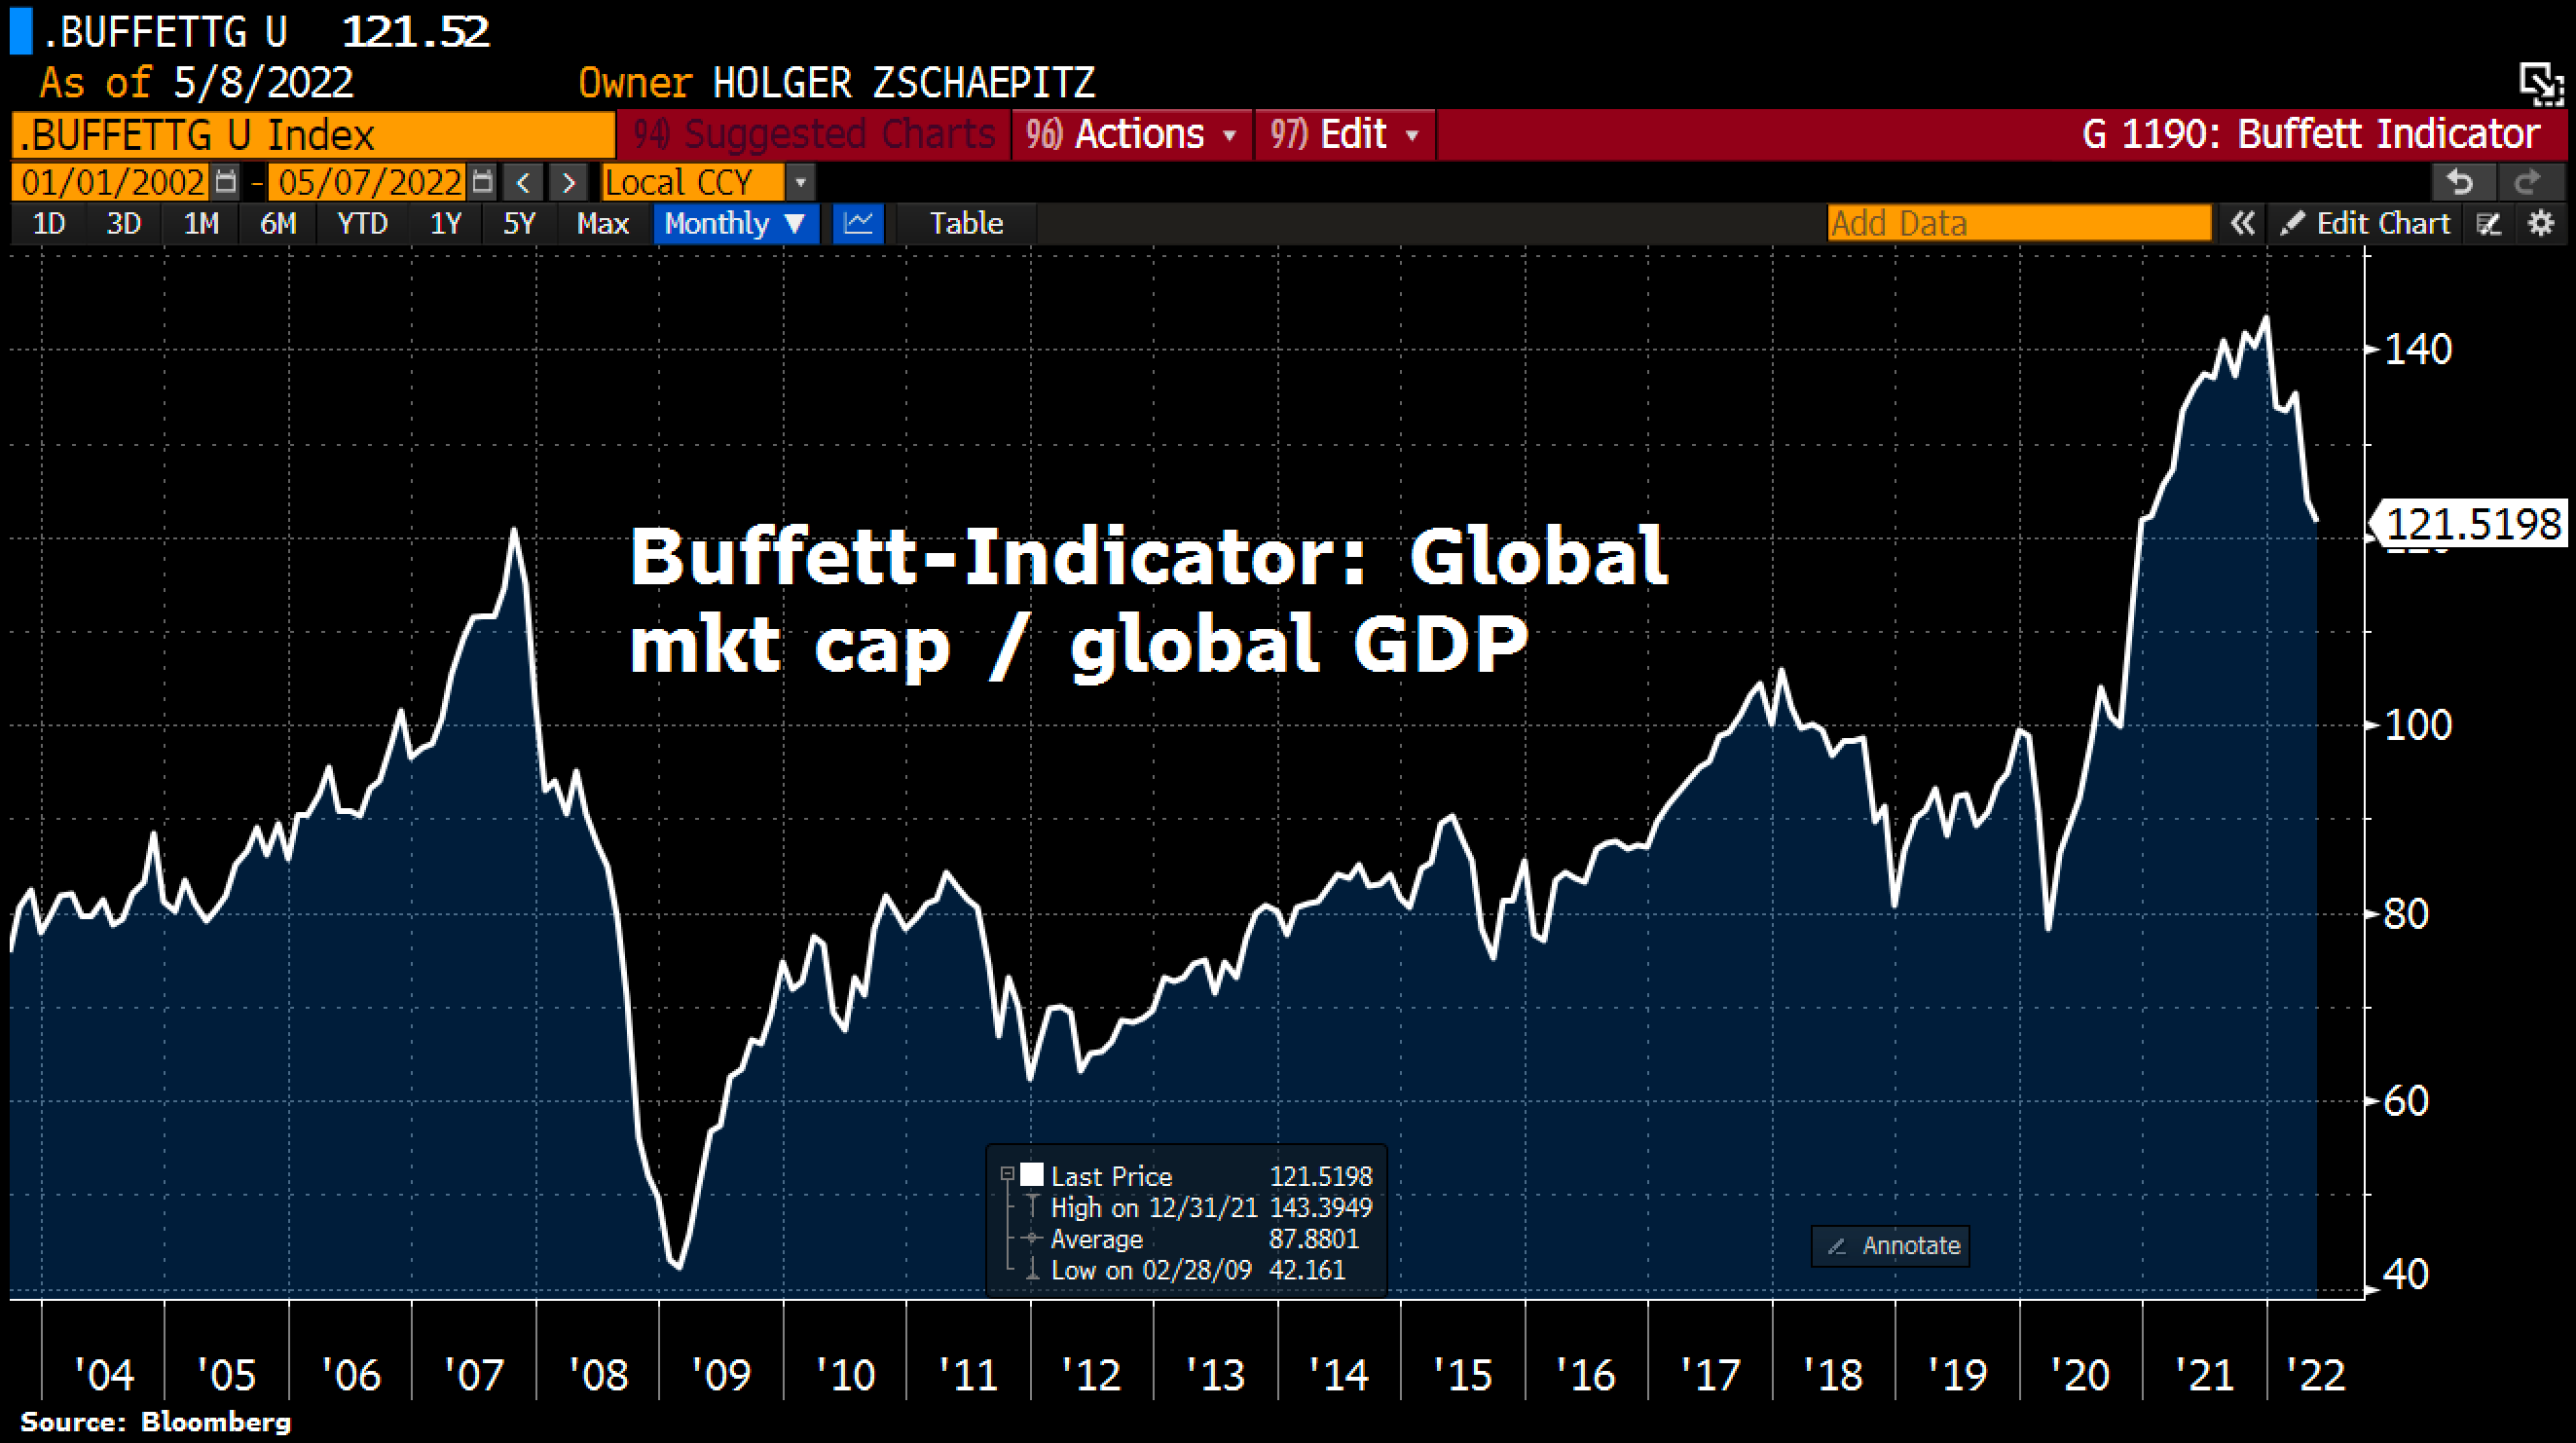 Holger Zschaepitz on Twitter: "Even after MSCI World has lost 16% from its peak, stocks are not really cheap if you use Buffett ratio, which divides the global stock